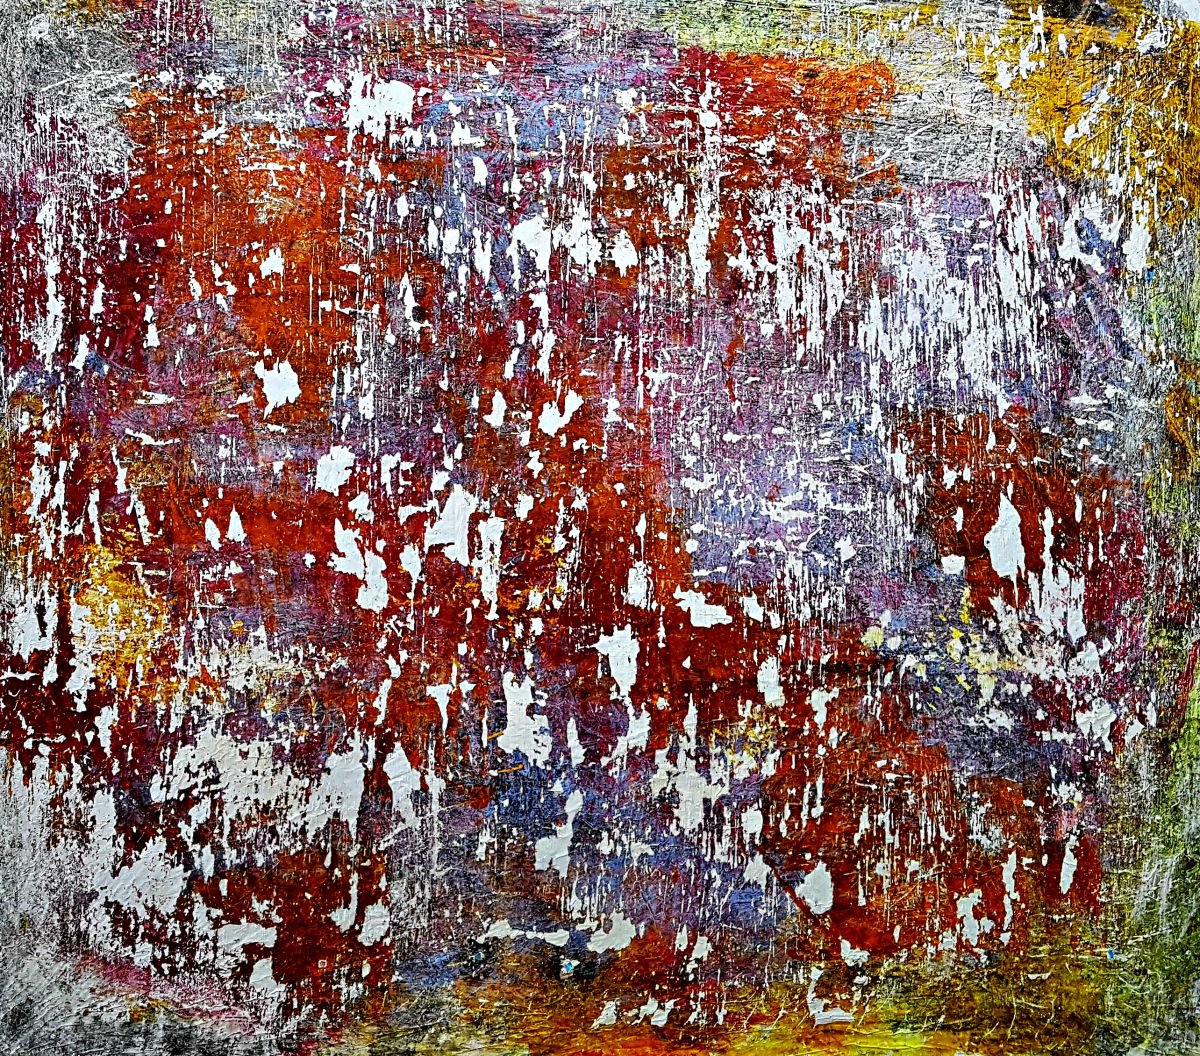 Faded memories (n.286) - 90 x 80 x 2,50 cm - ready to hang - acrylic painting on stretched... by Alessio Mazzarulli